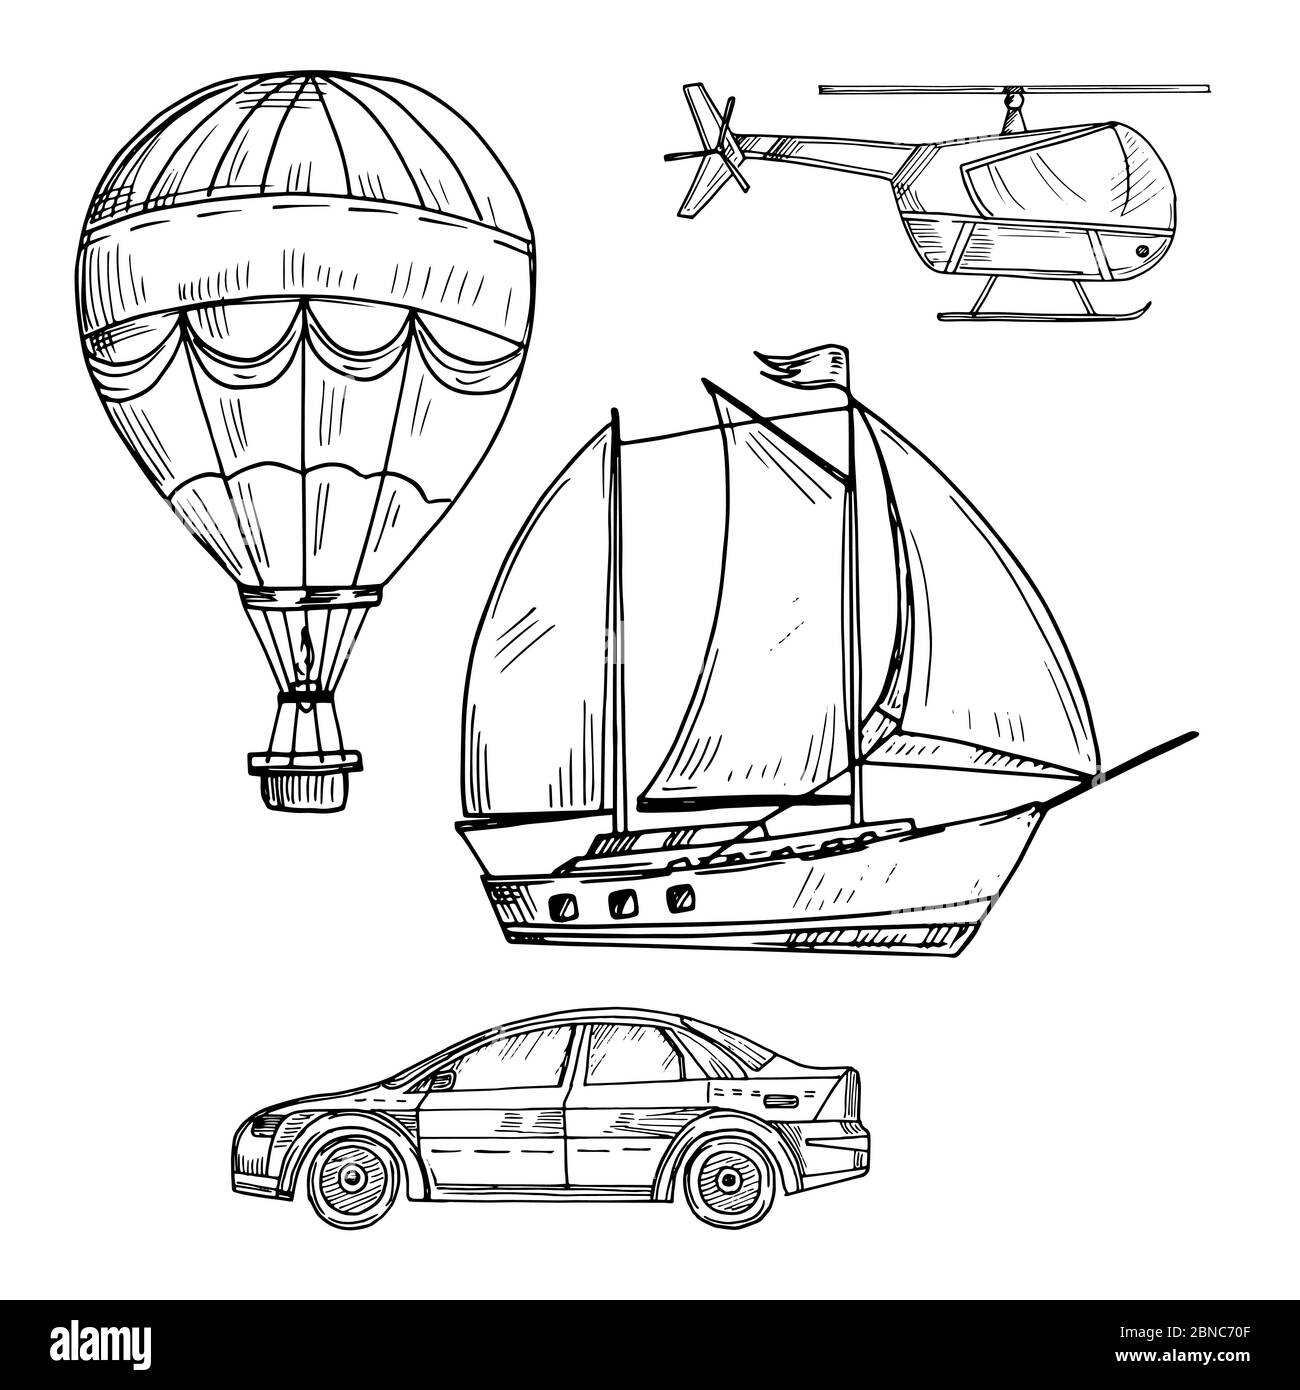 Doodle style drawing land, air and sea transport vector set illustration isolated on white Stock Vector